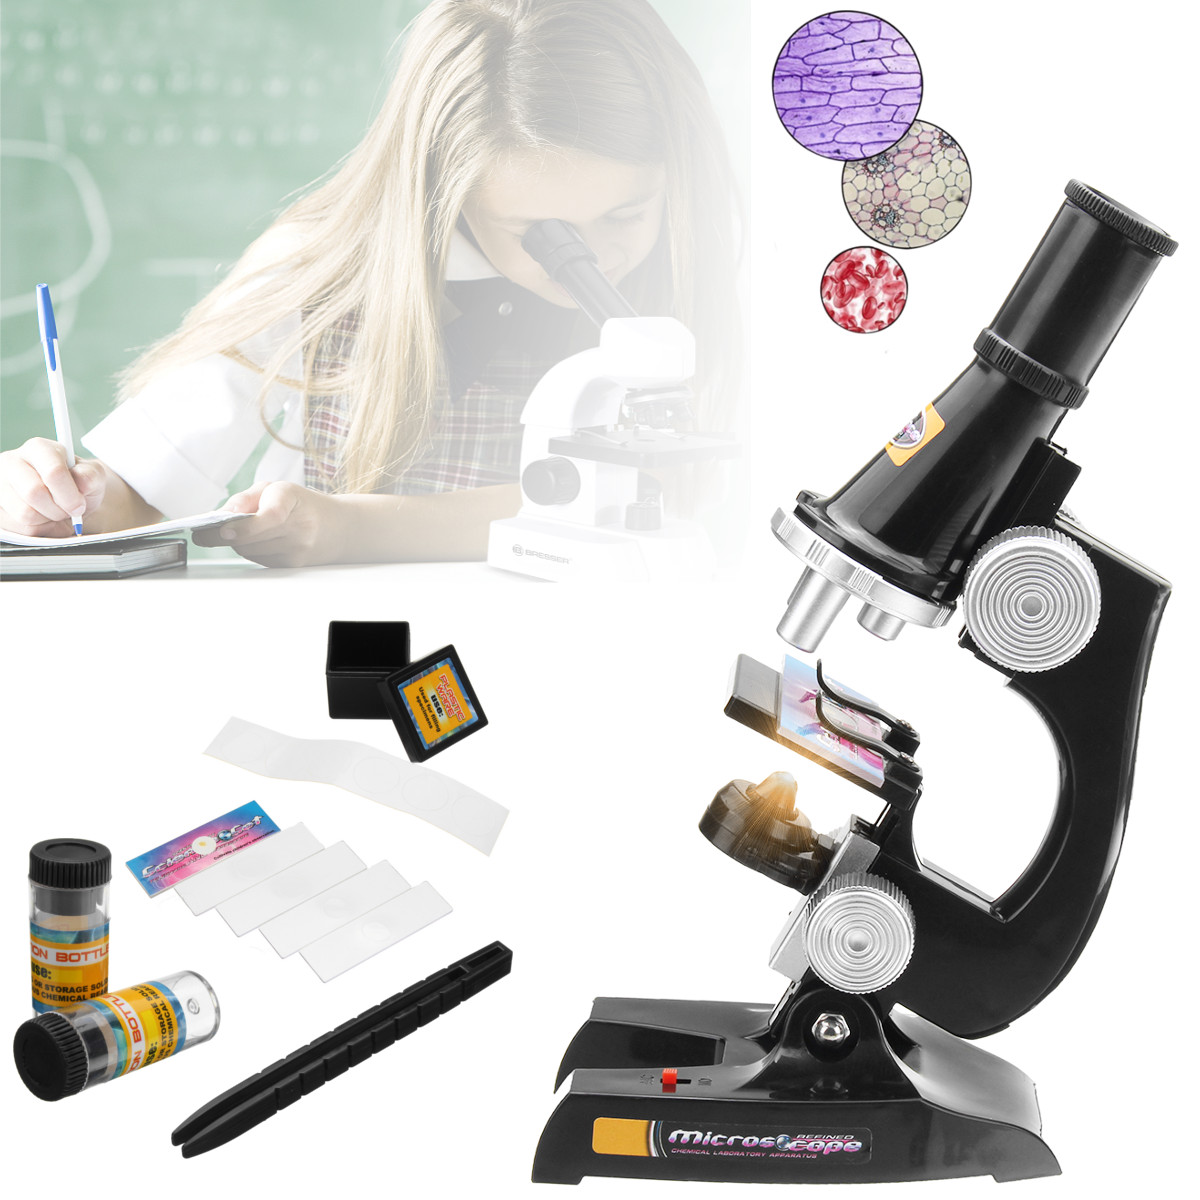 Childrens-Kids-Junior-Microscope-Science-Lab-Set-with-Light-Educational-Toy-1626068-1